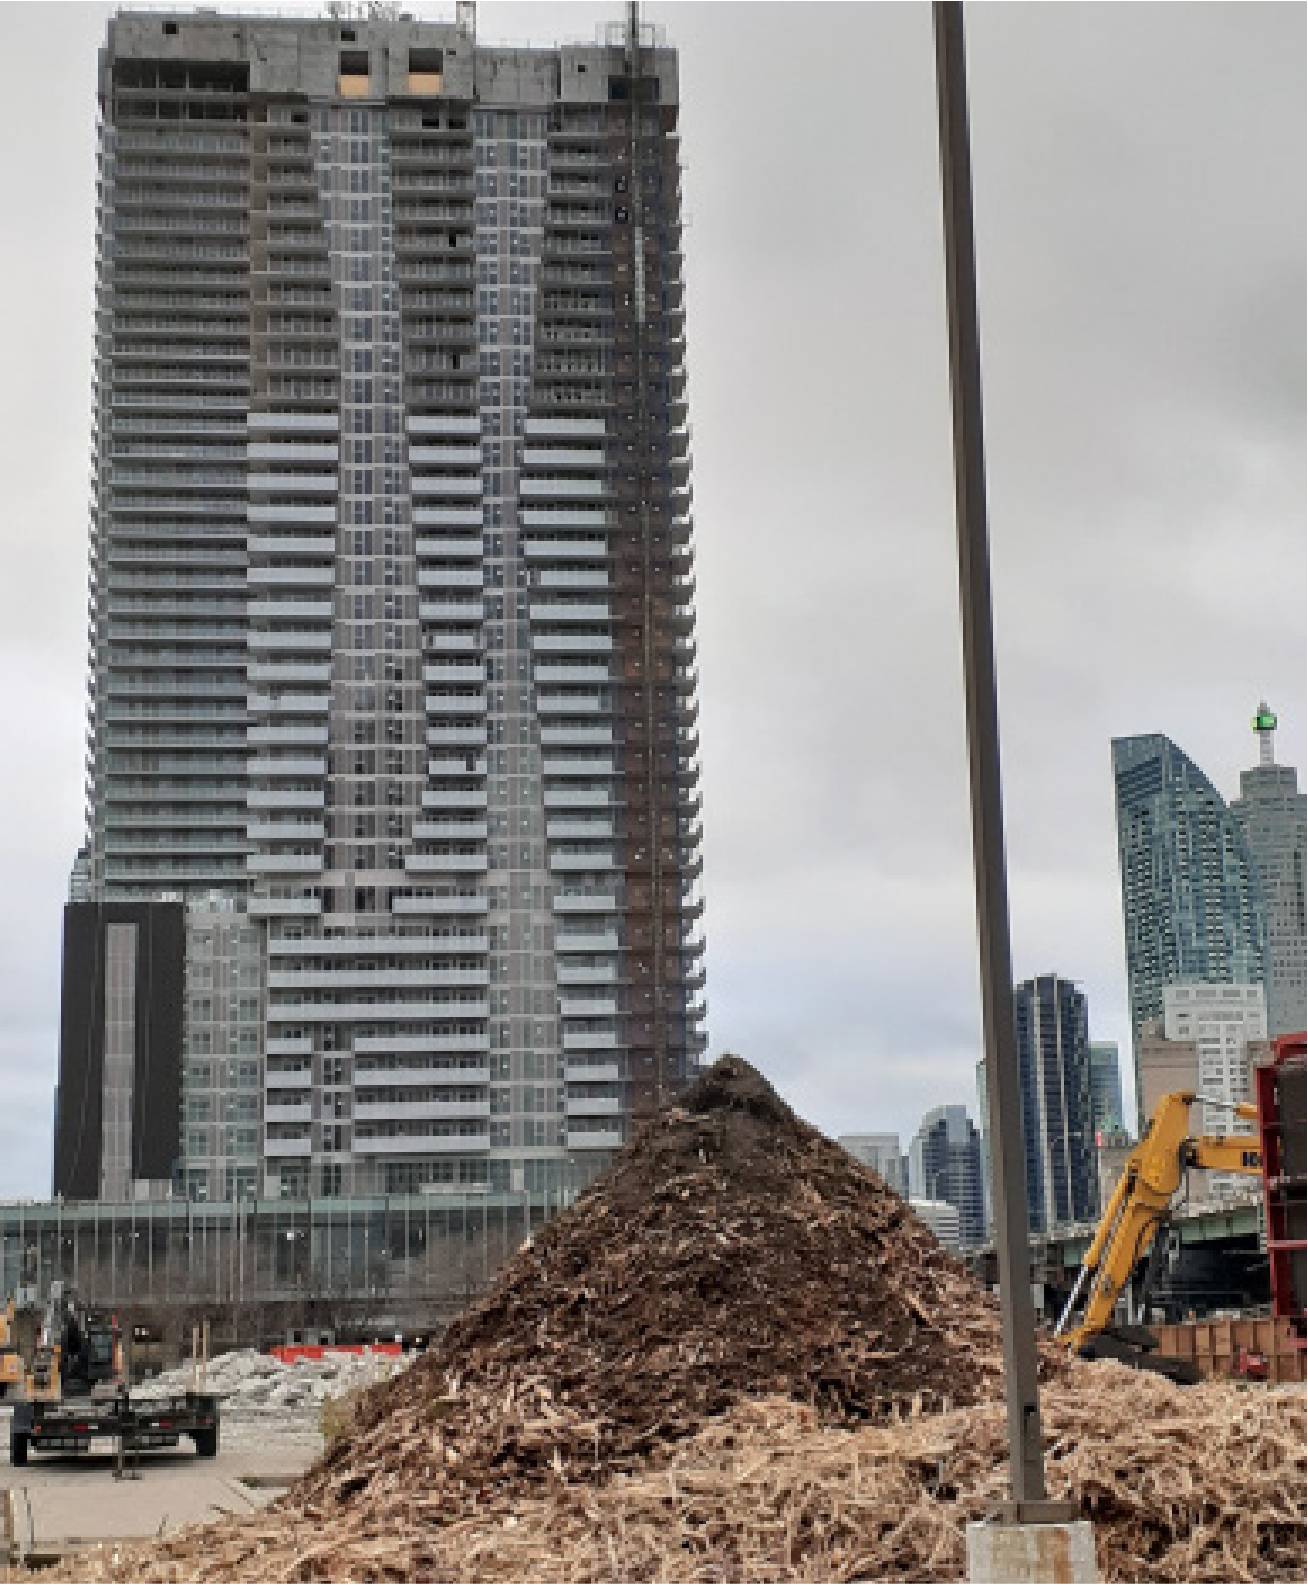 High rise with a rubble of wood chips